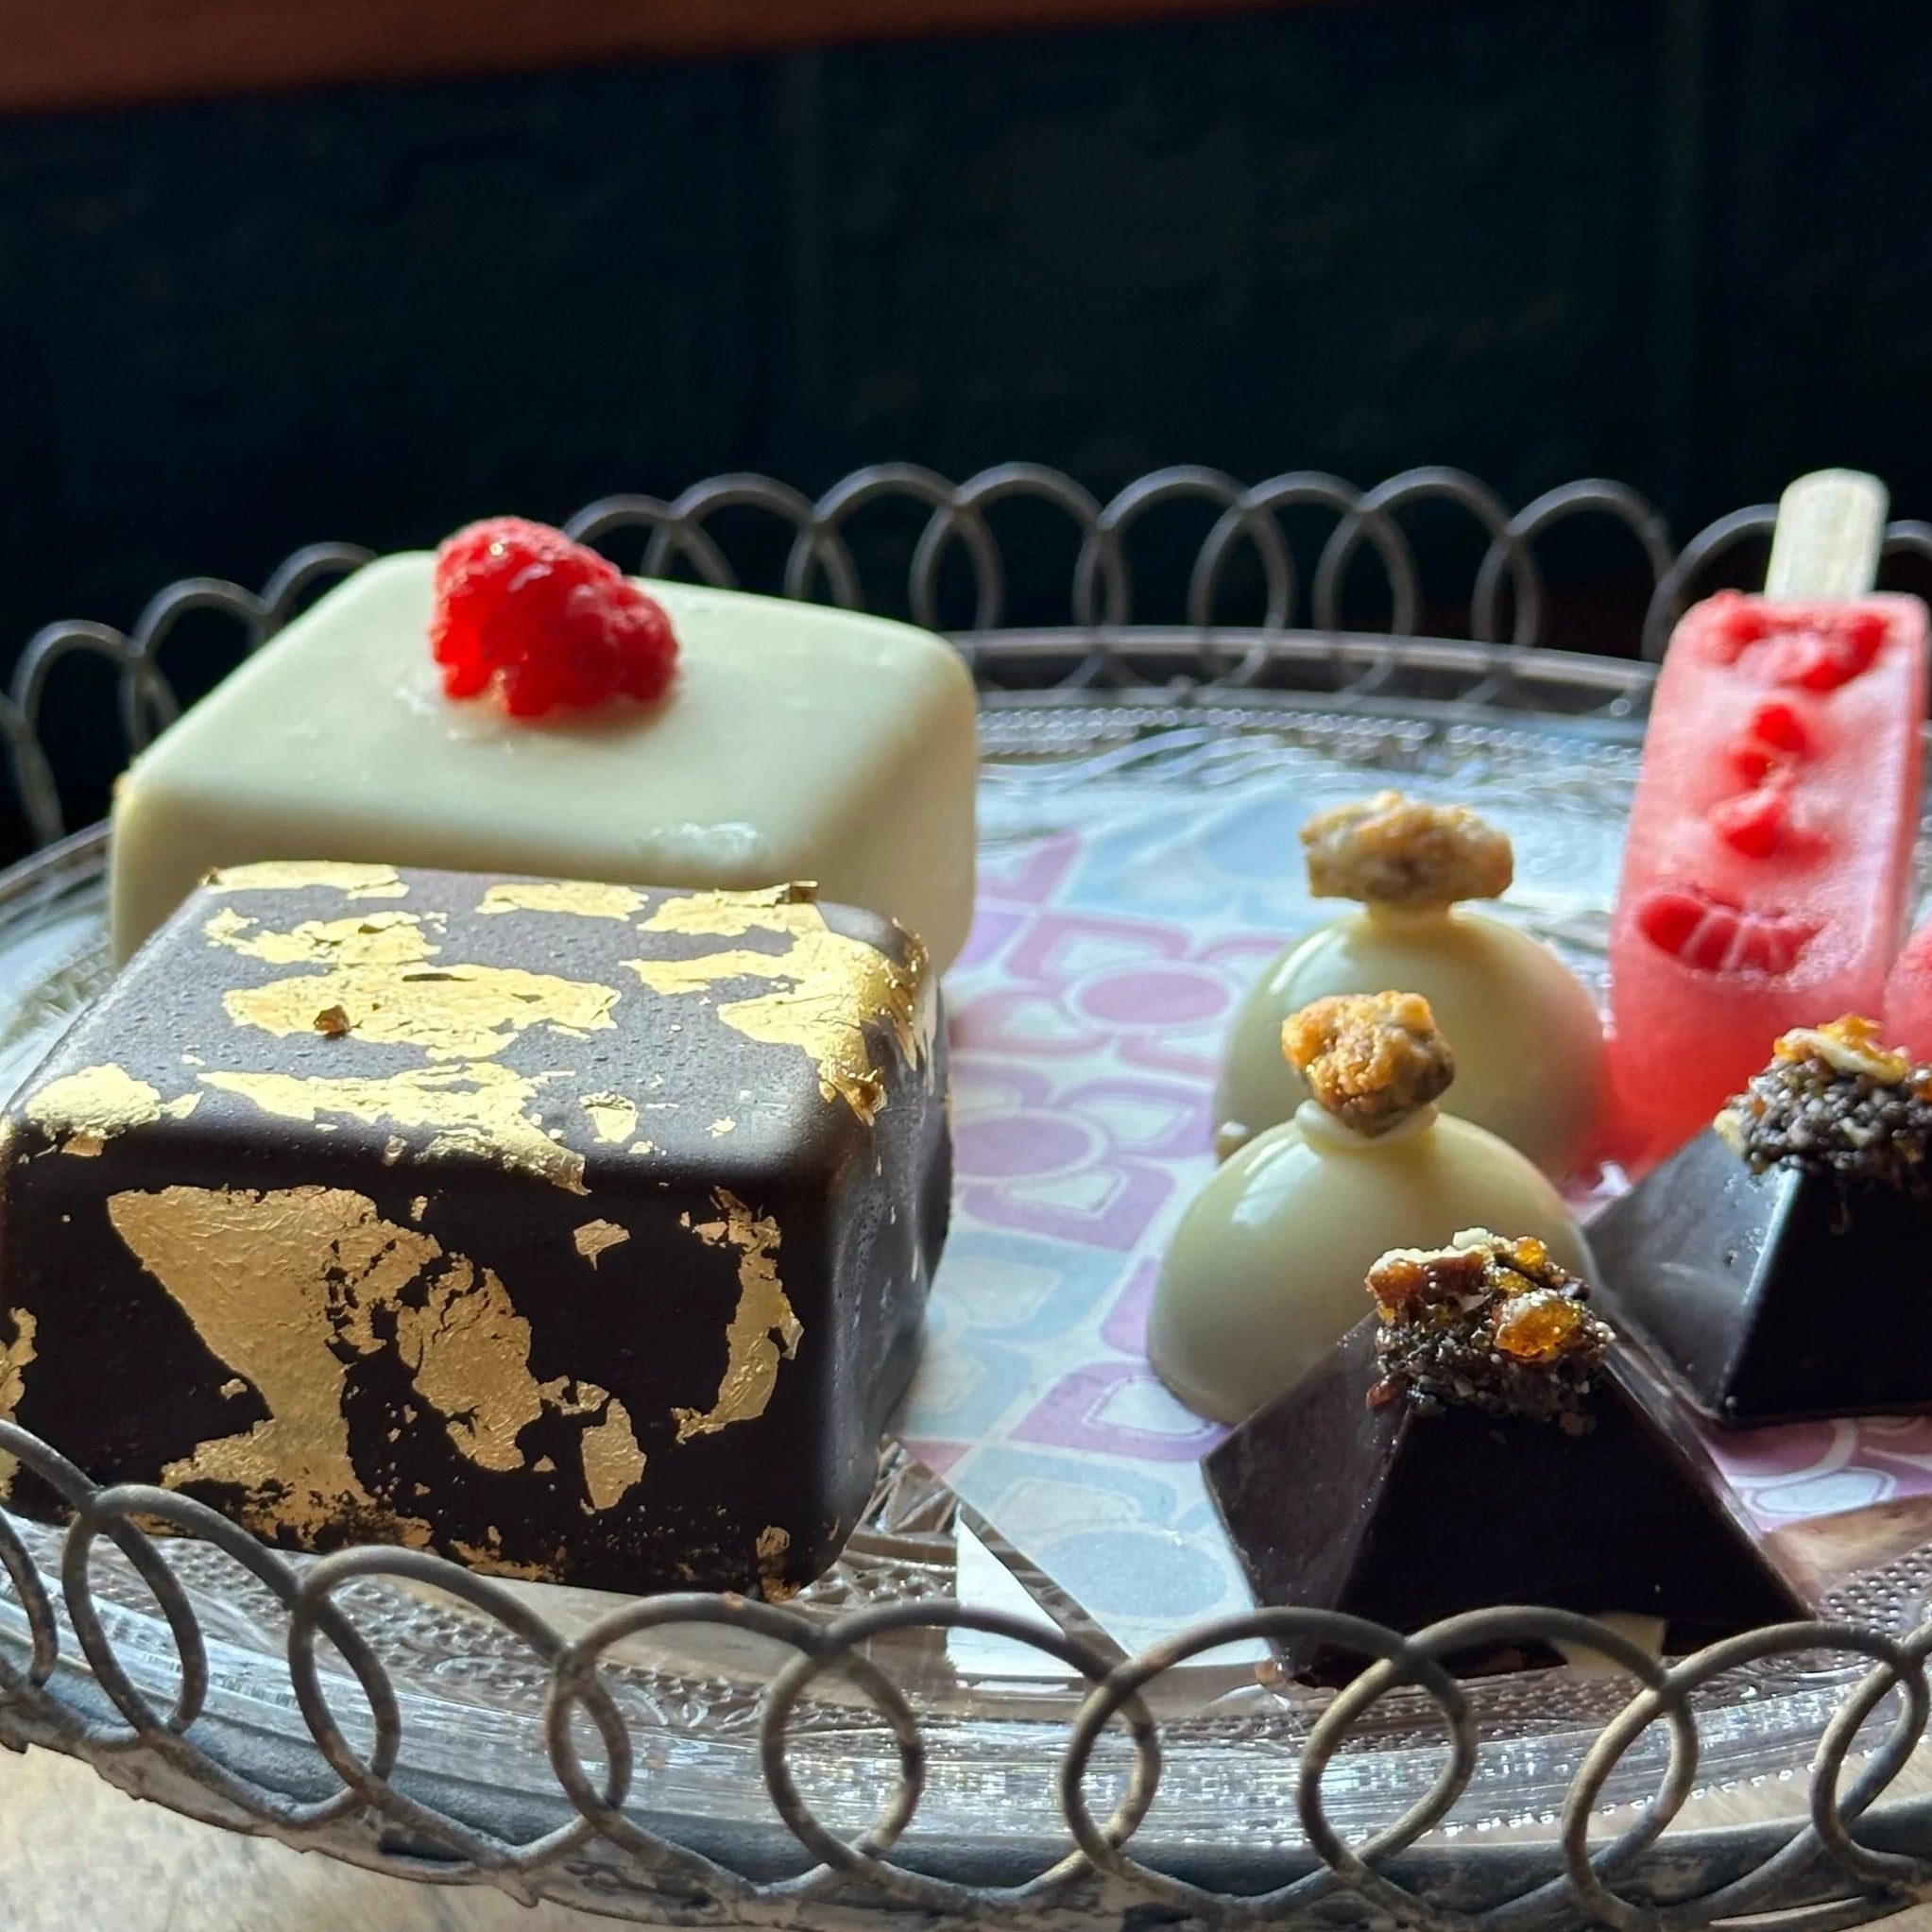 Mini ice cream cakes and ice cream chocolates decorated with gold, nuts and berries